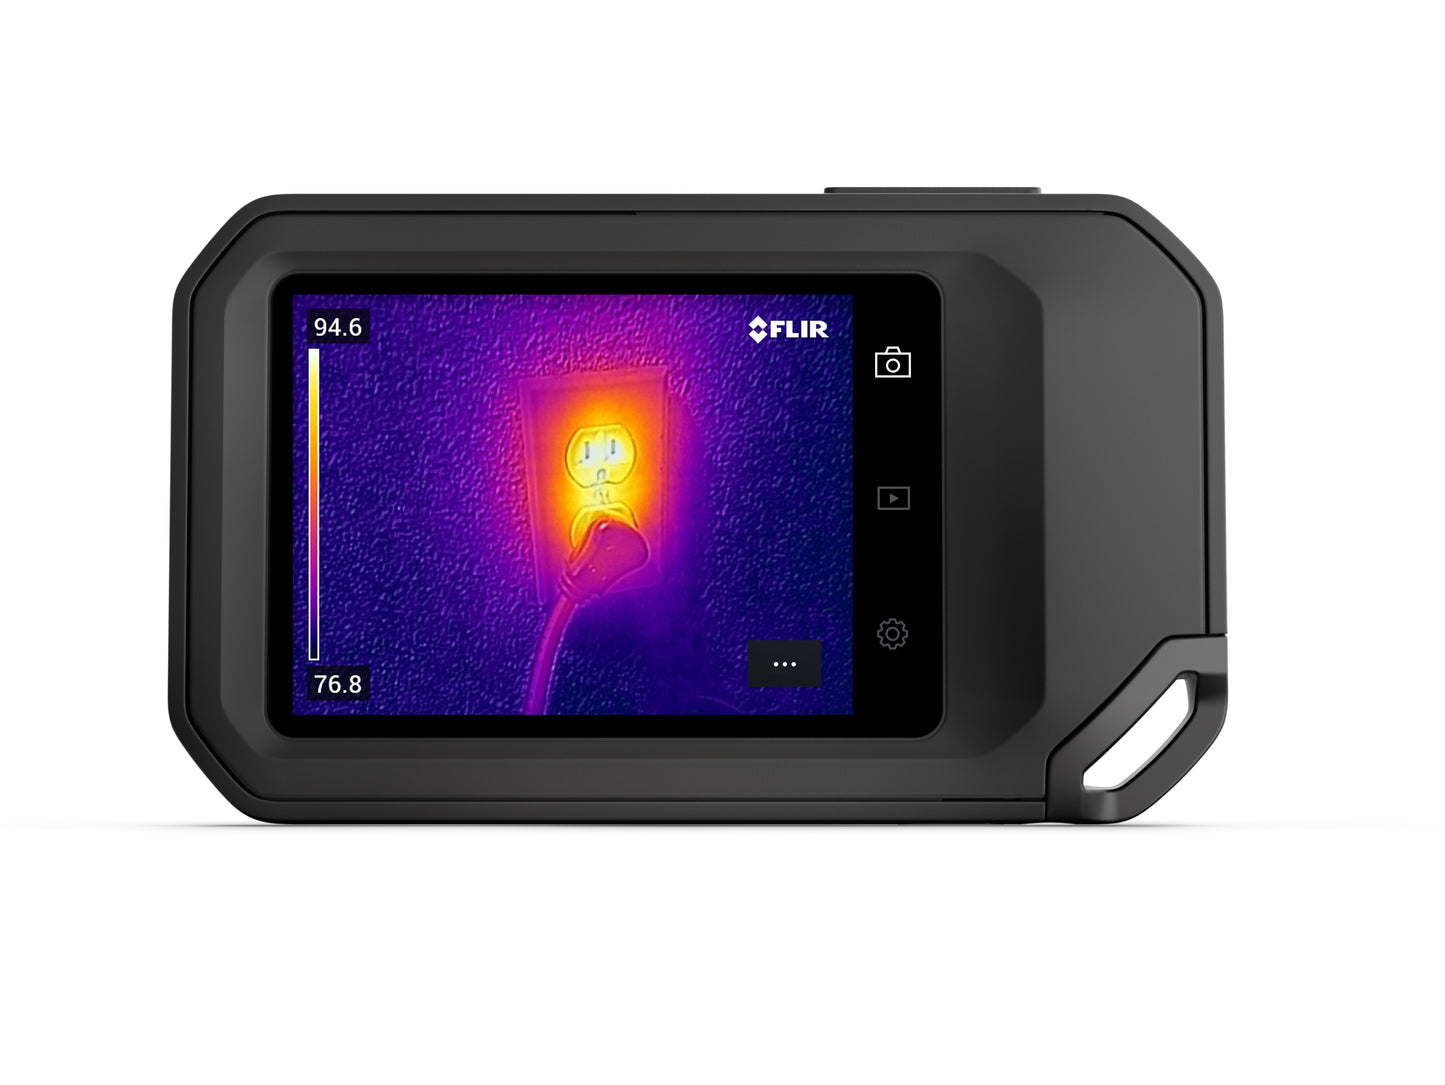 FLIR C3-X Compact Thermal Camera with WiFi